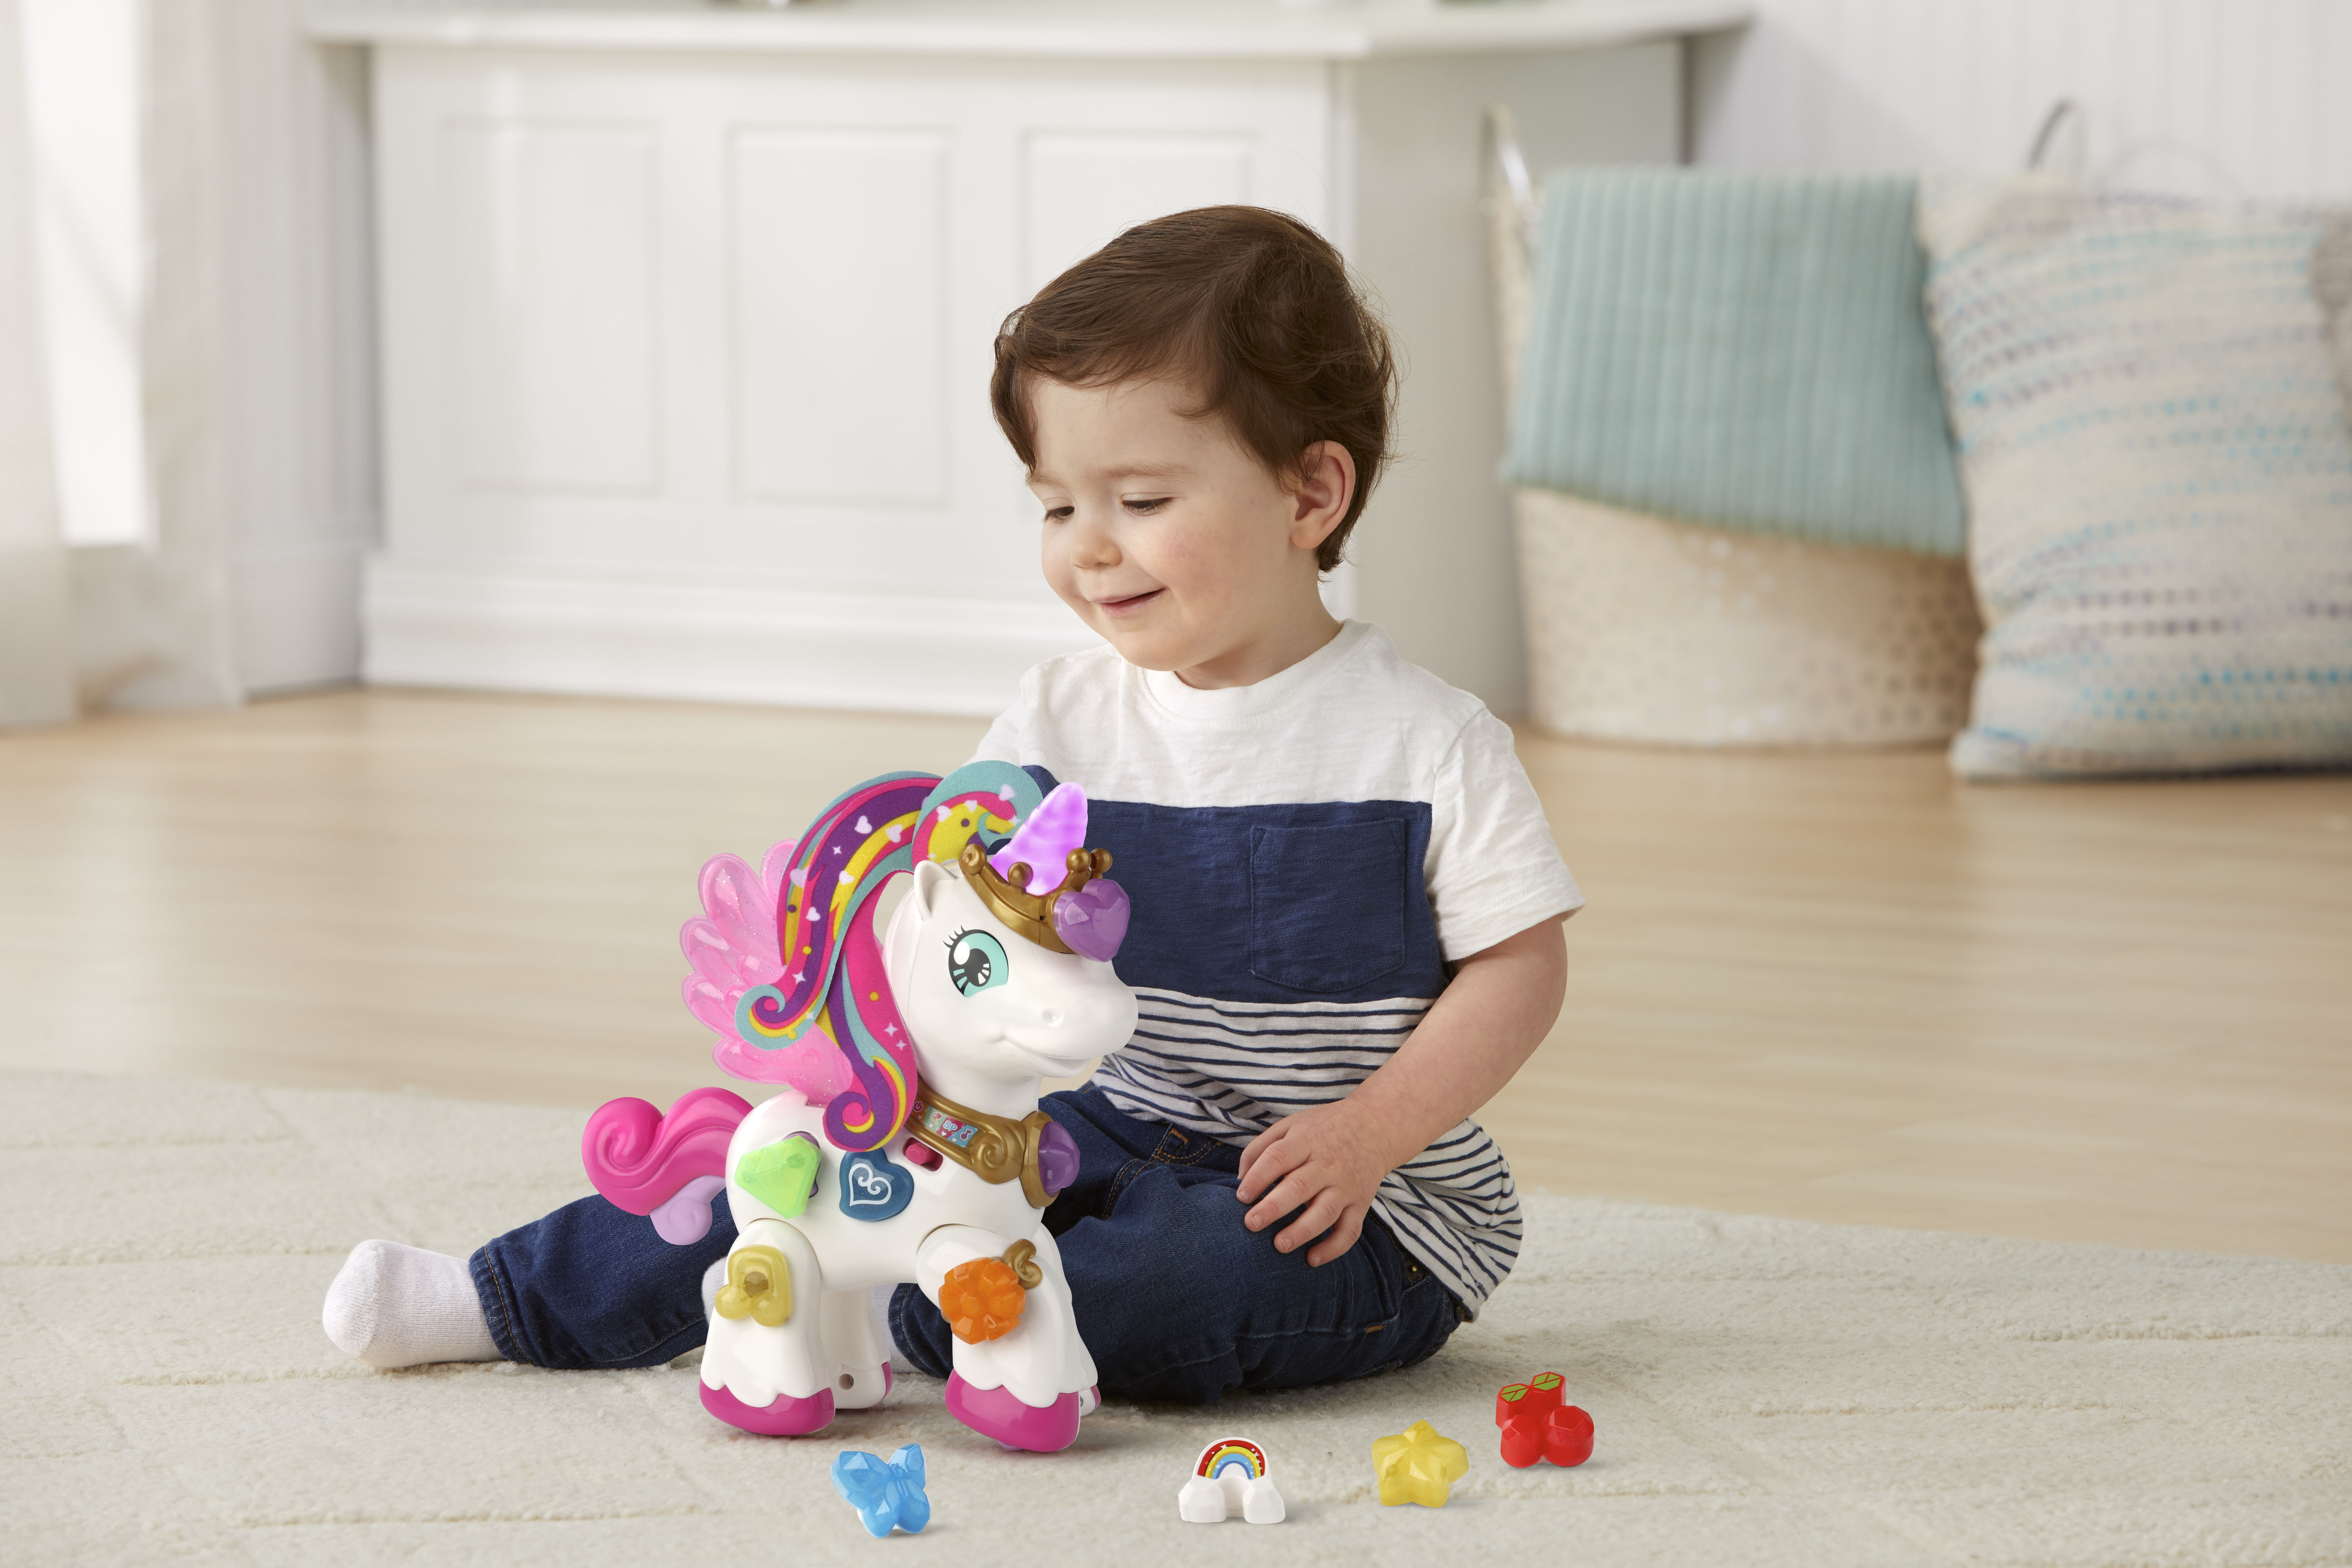 VTech Starshine the Bright Lights Unicorn, Imaginative Play Toy for Toddlers - image 3 of 12